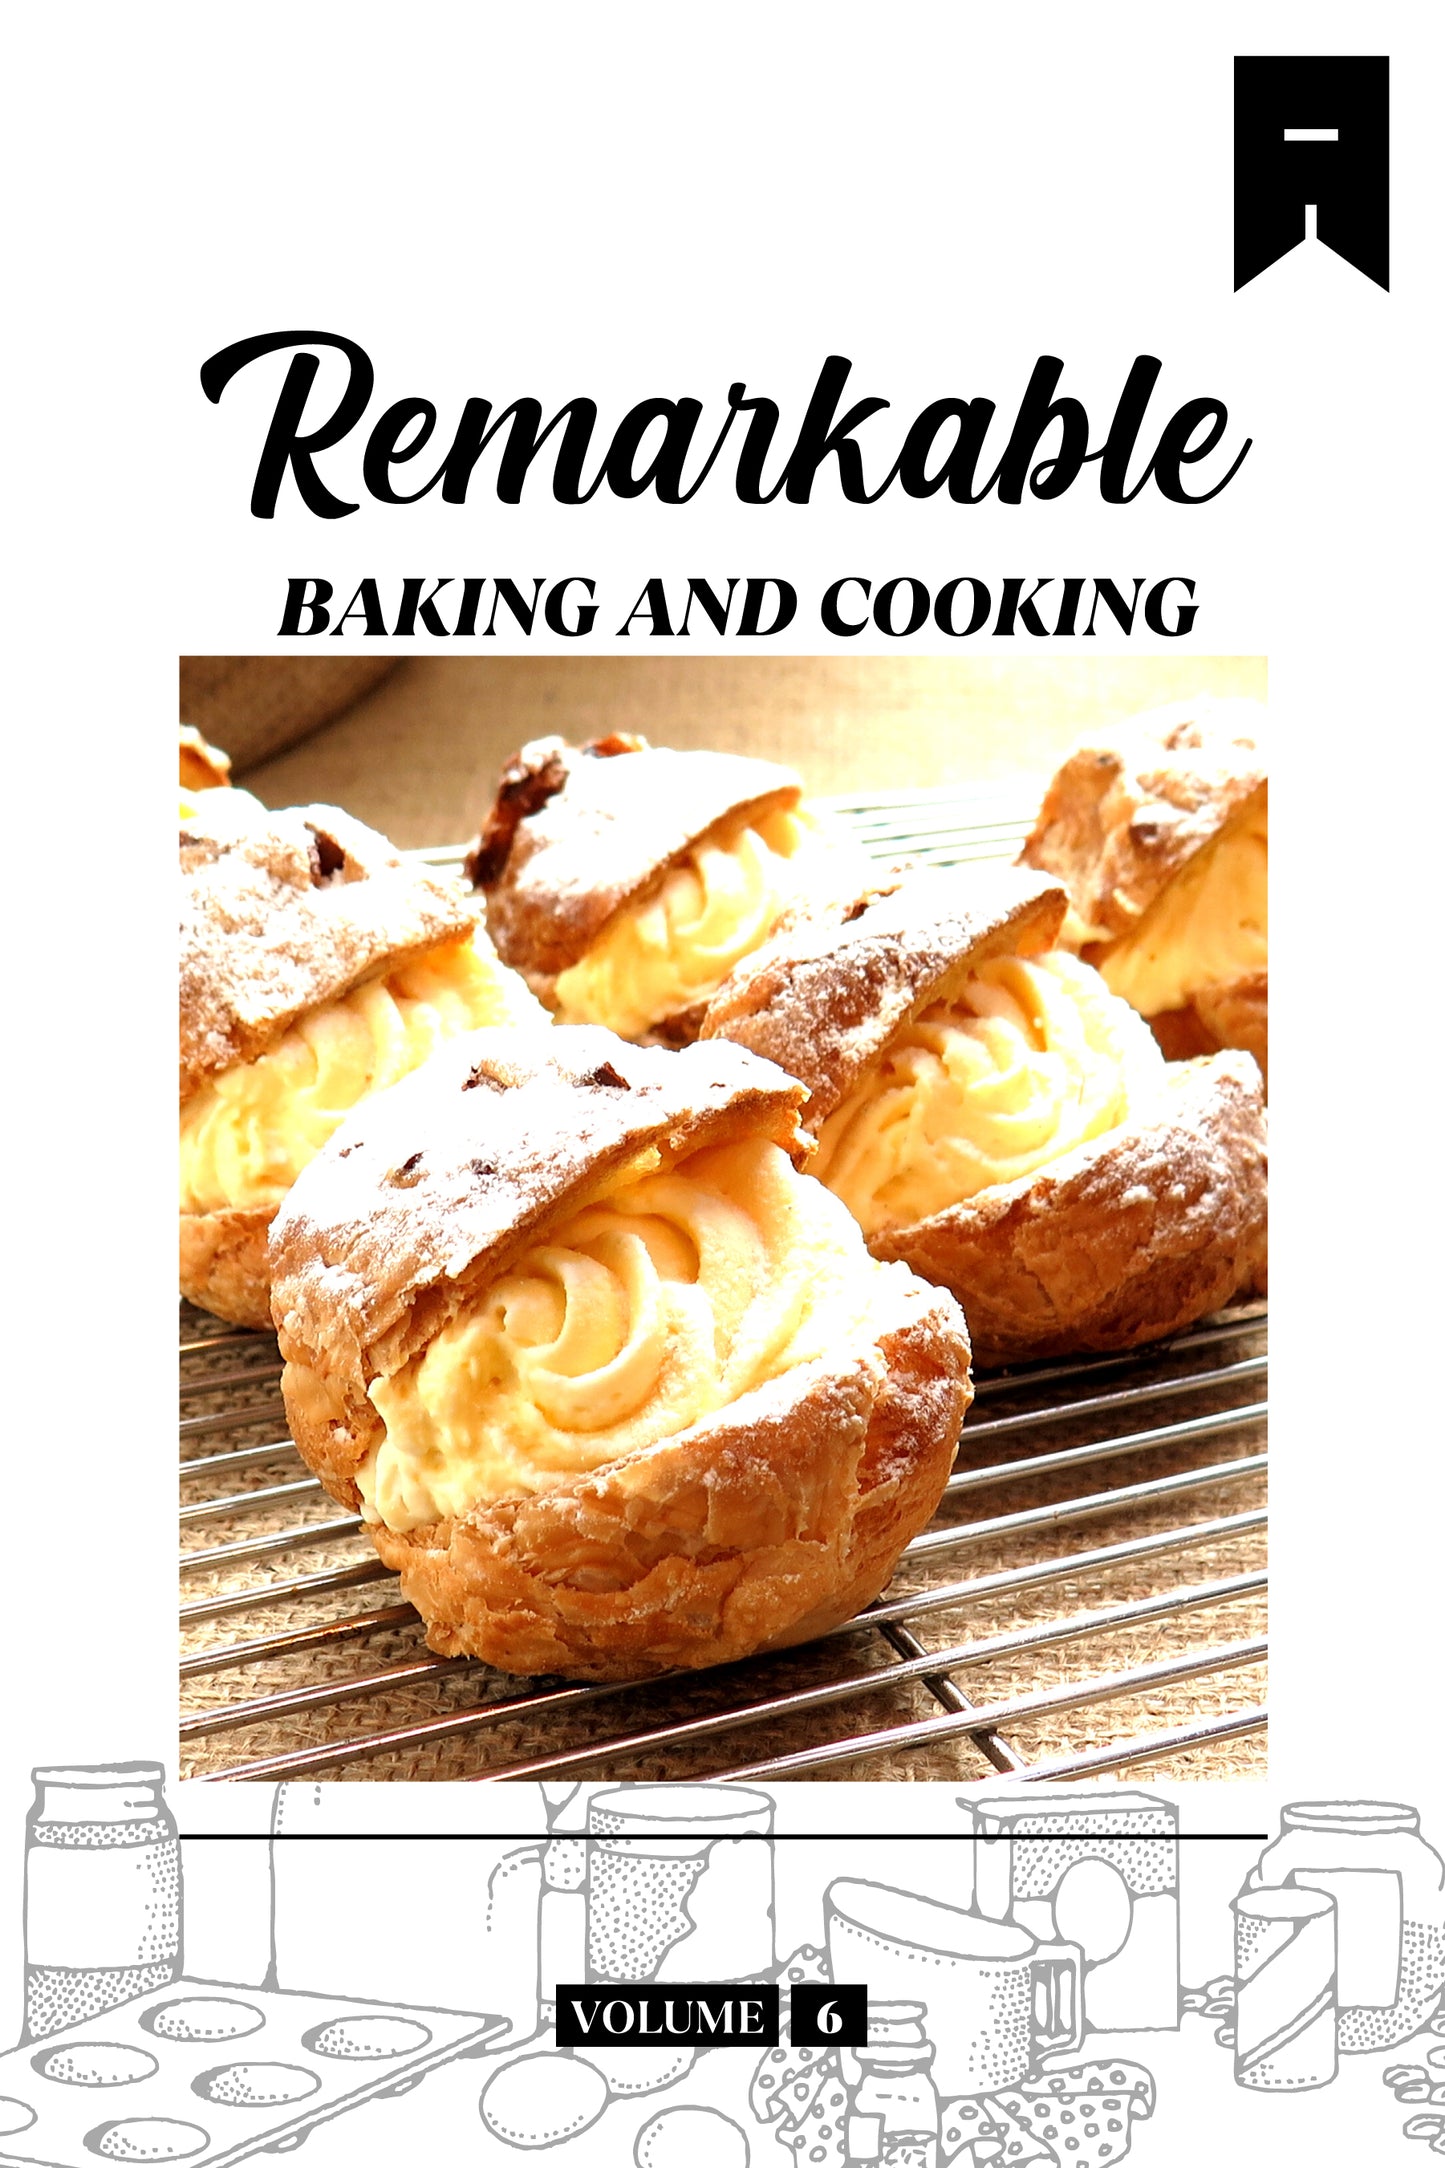 Remarkable Baking (Volume 6) - Physical Book